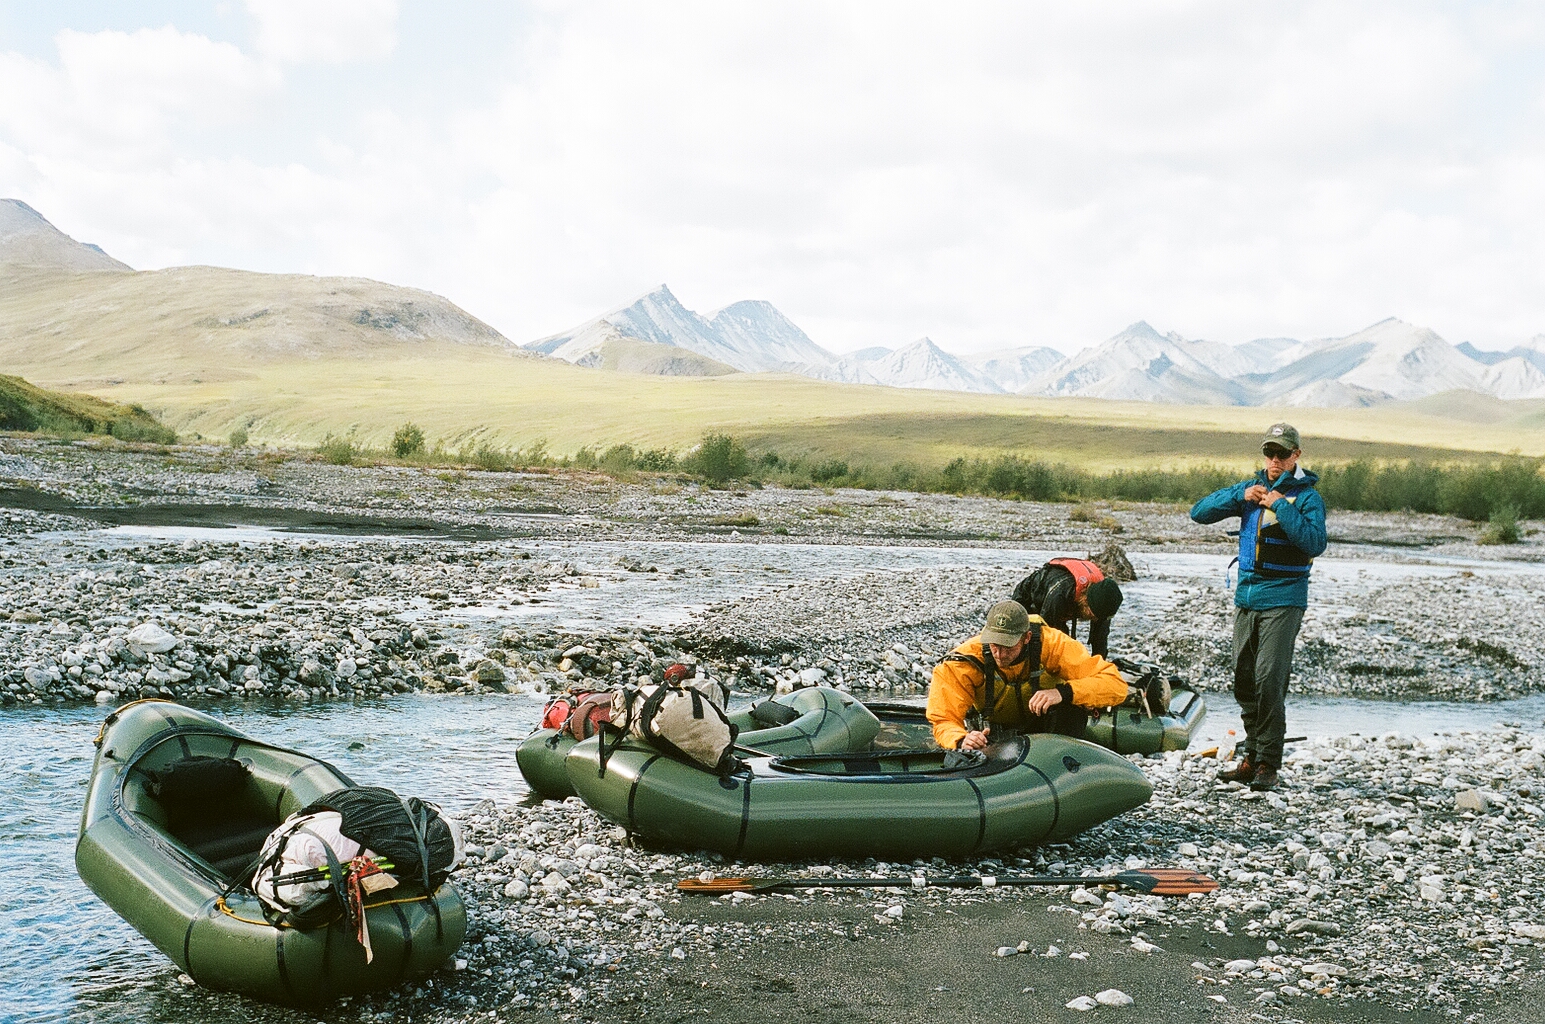  Molly Harrison on Conservation and Adventure in ANWR